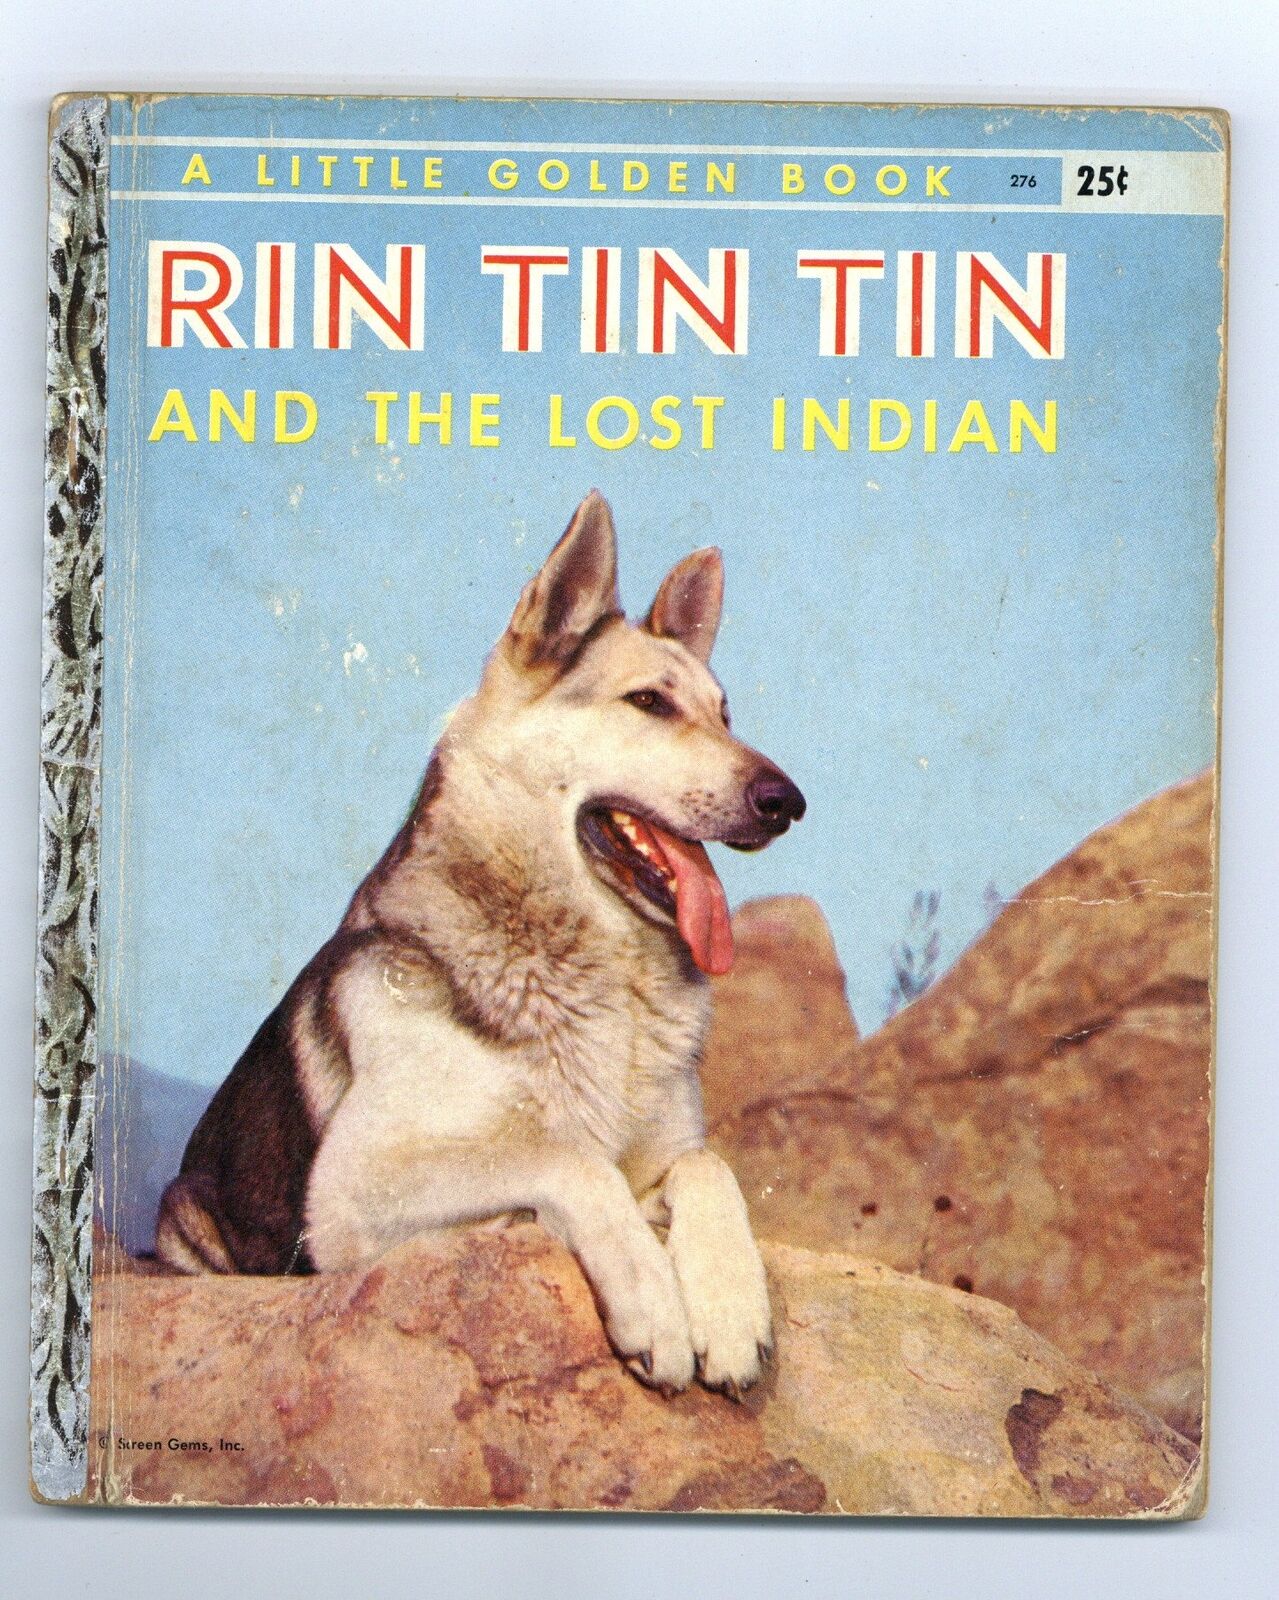 Rin Tin Tin and the Lost Indian HC #276 VG+ 4.5 1956